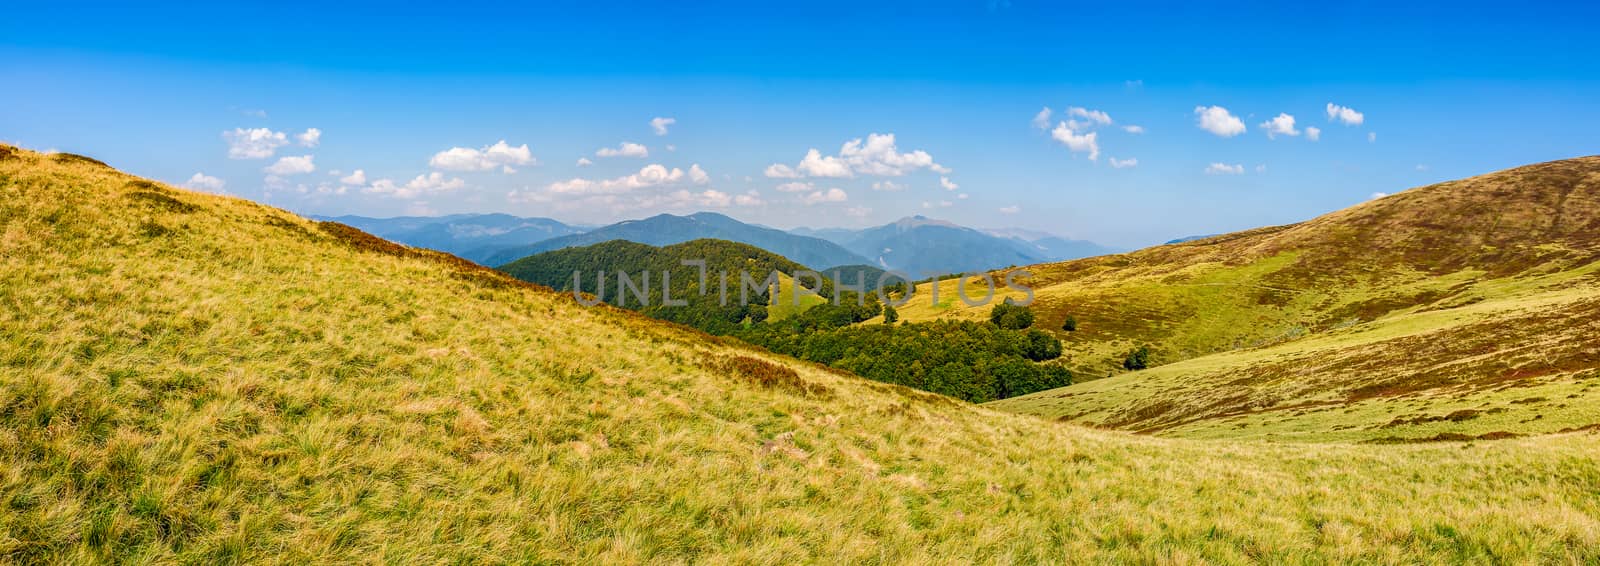 hillside panorama in mountains by Pellinni